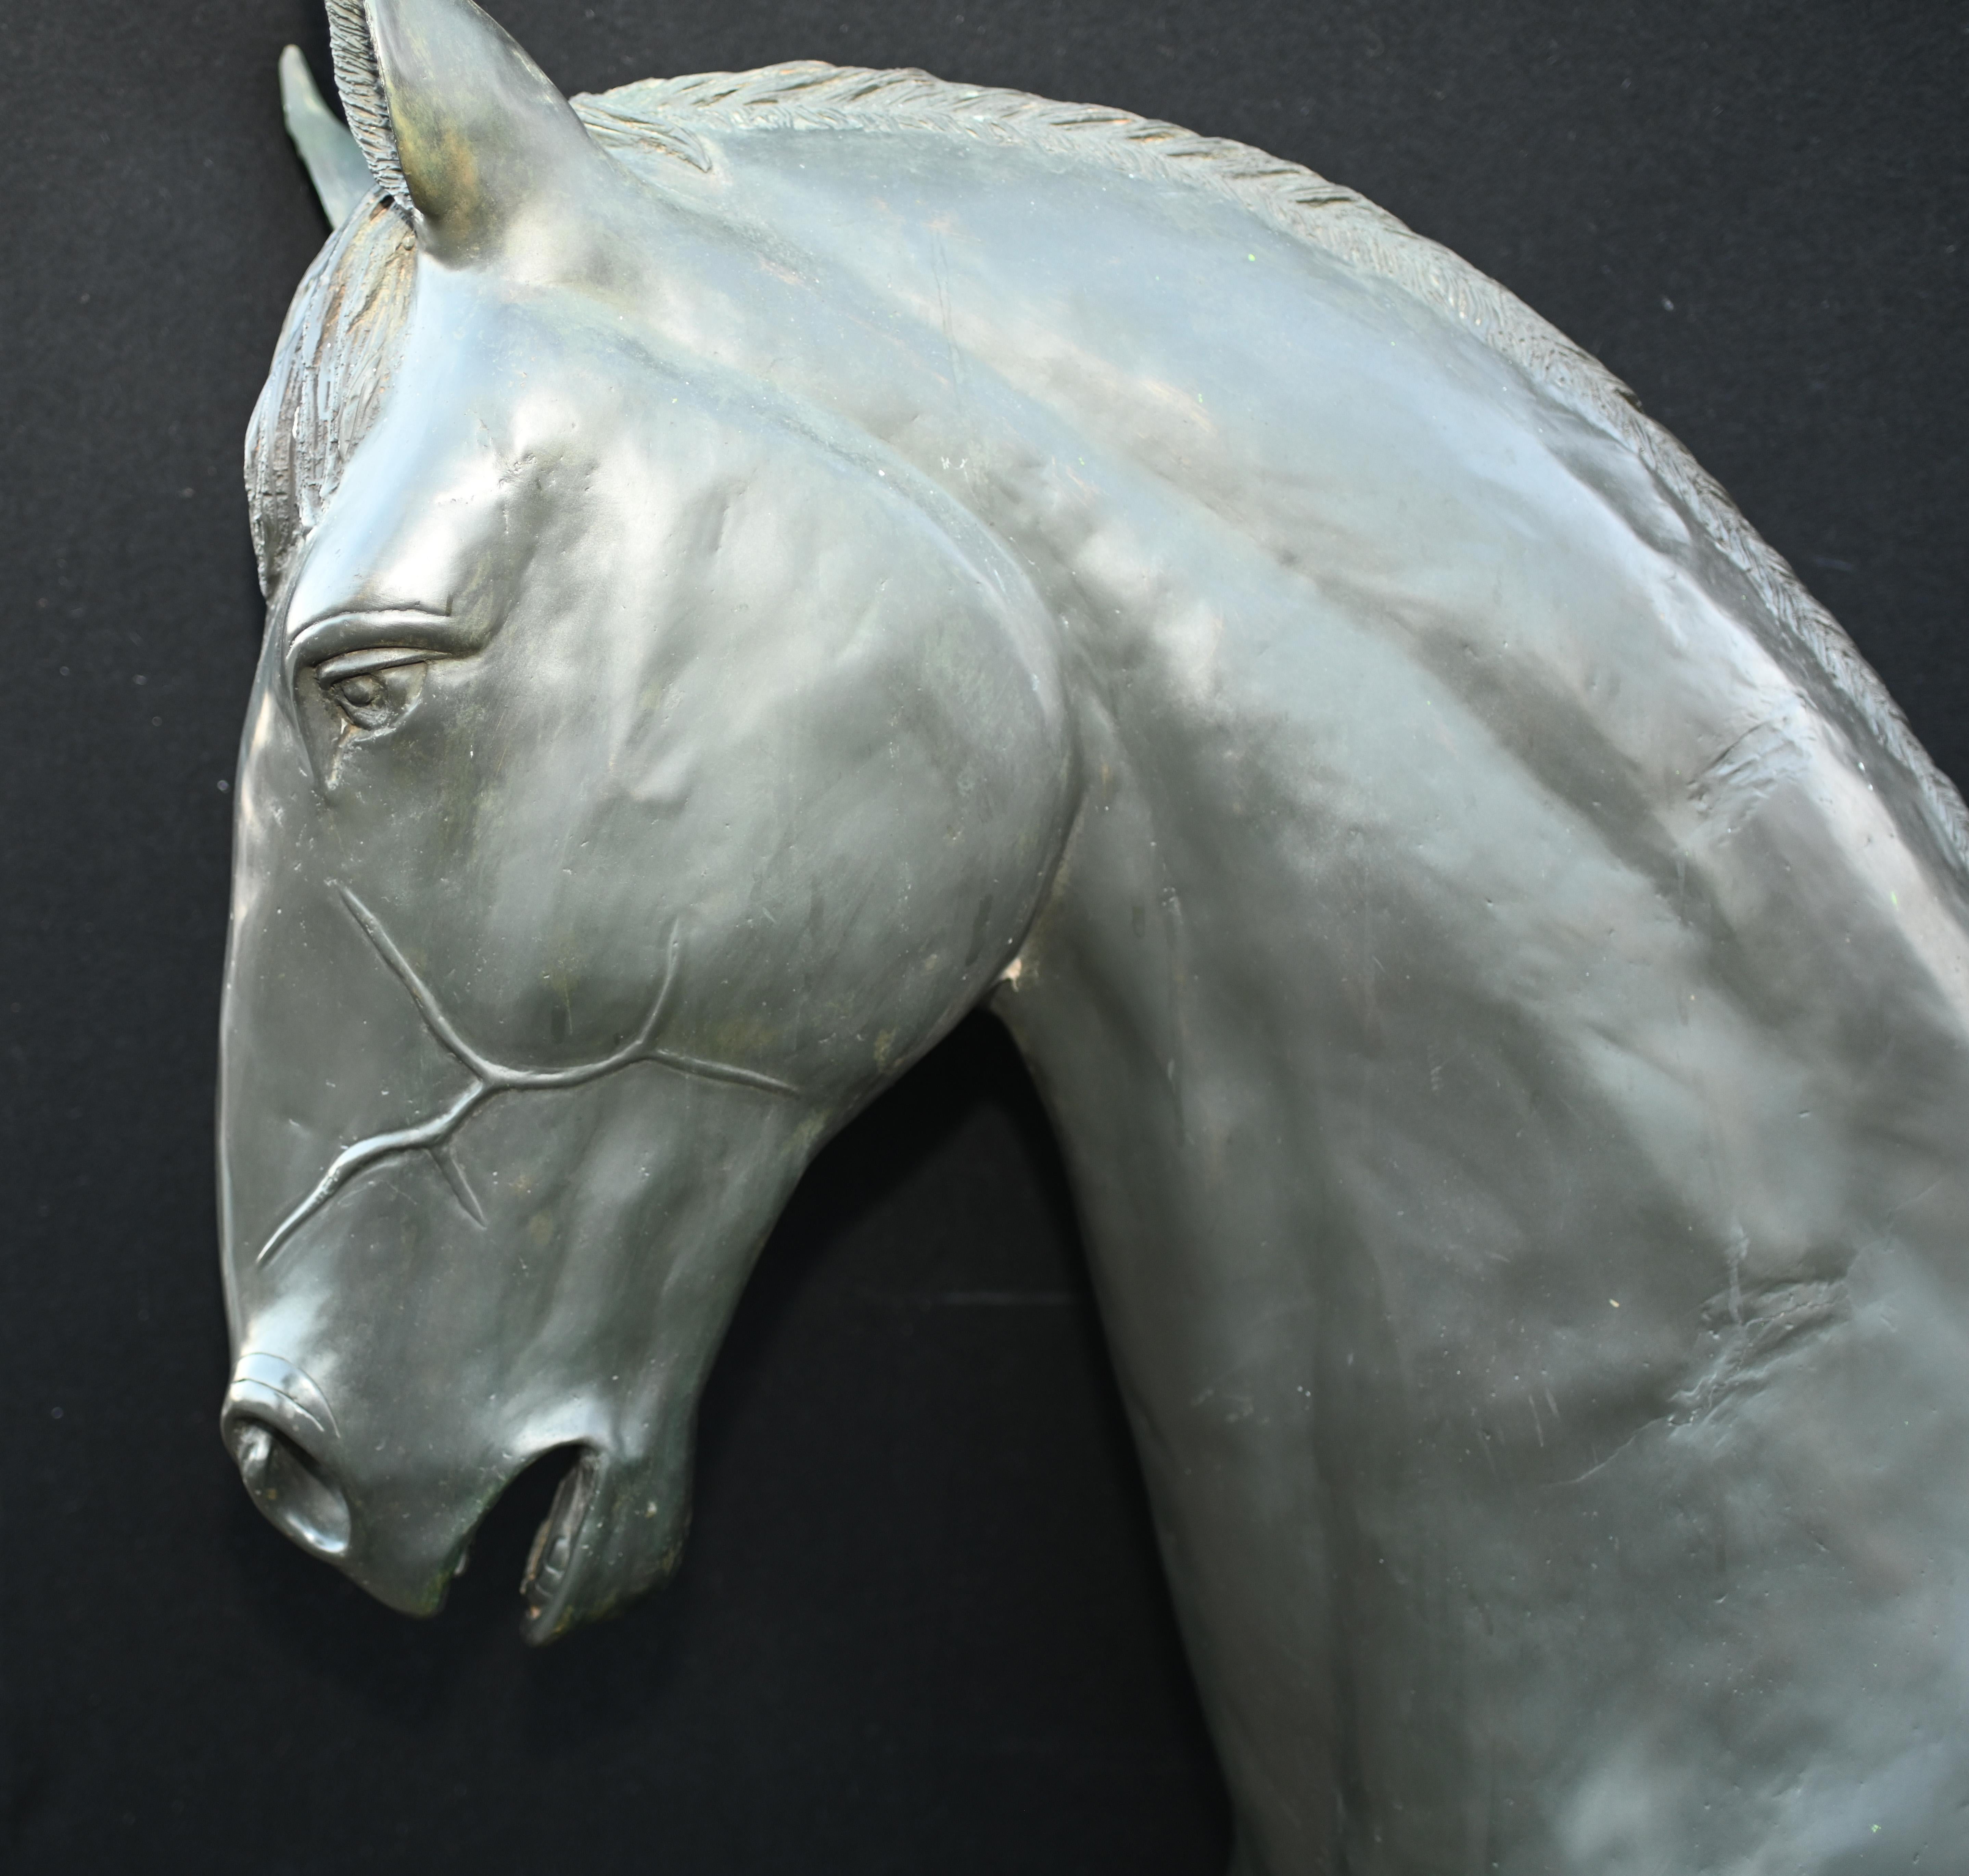 Wonderful bronze horse that stands in at almost seven feet tall - 203 cm.
Great casting, of course being bronze could live outside with no fear or rusting hence great for a garden
Look at how the artist has rendered details like the